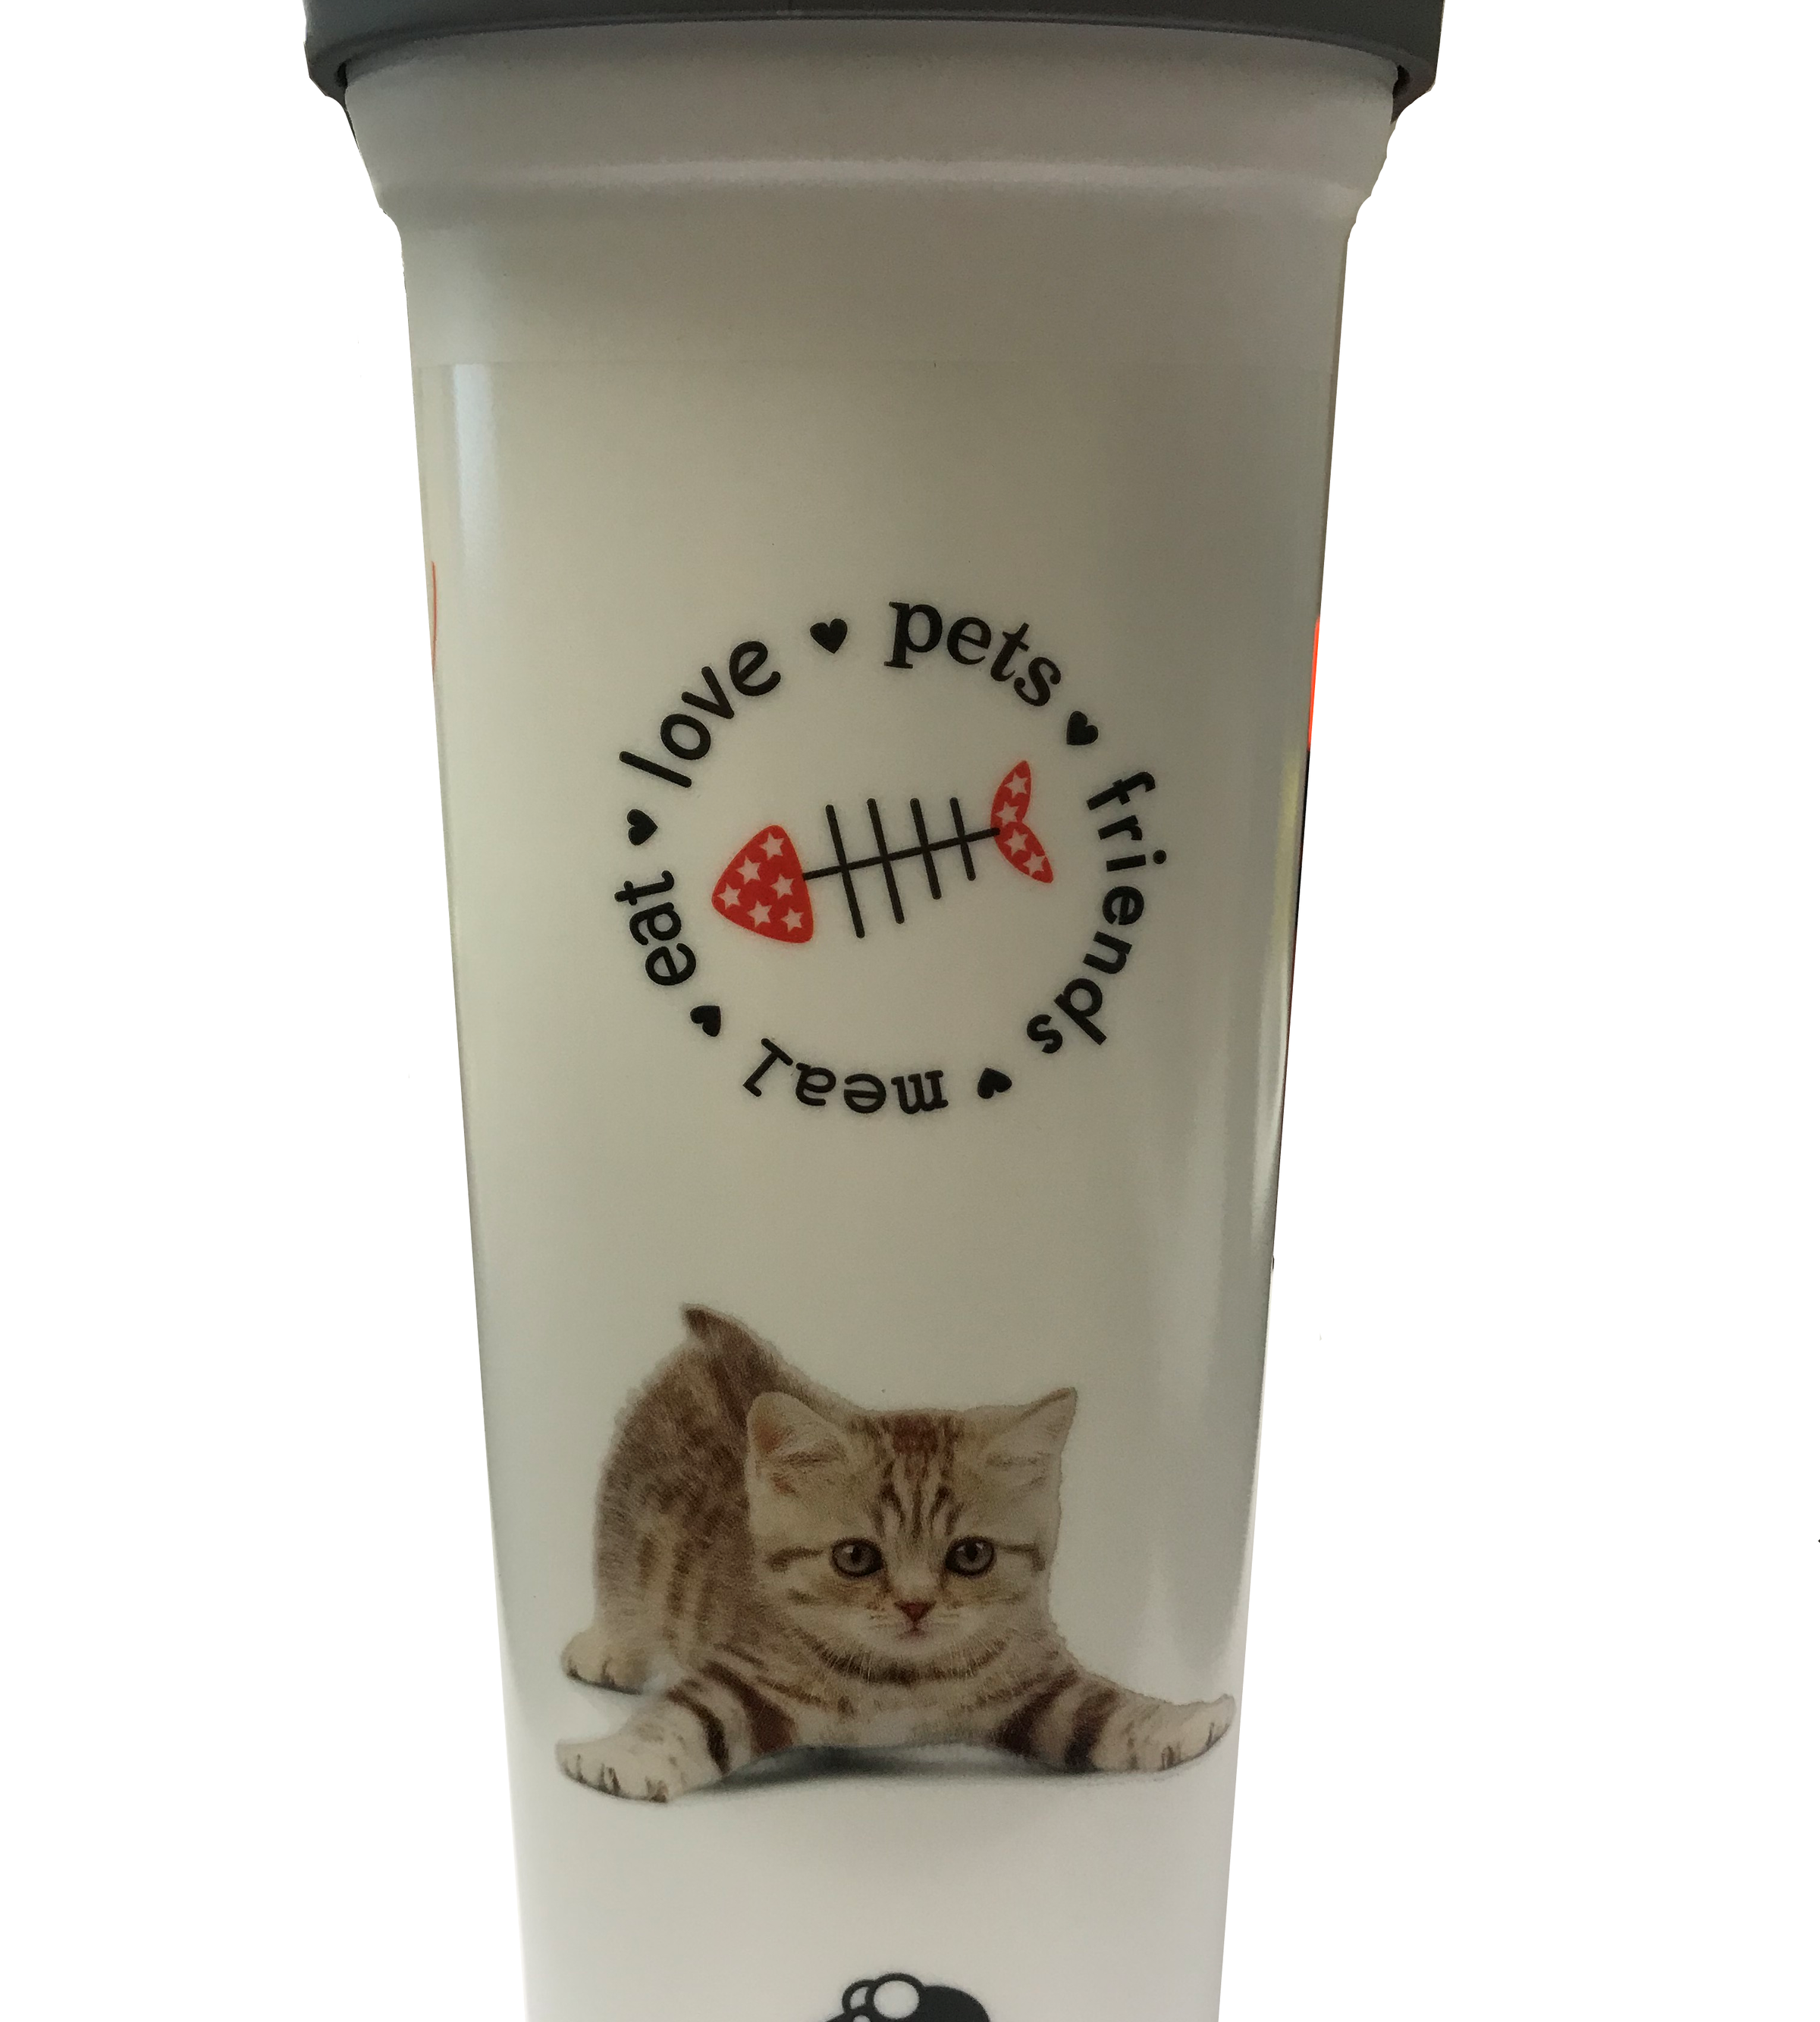 Small pet food container